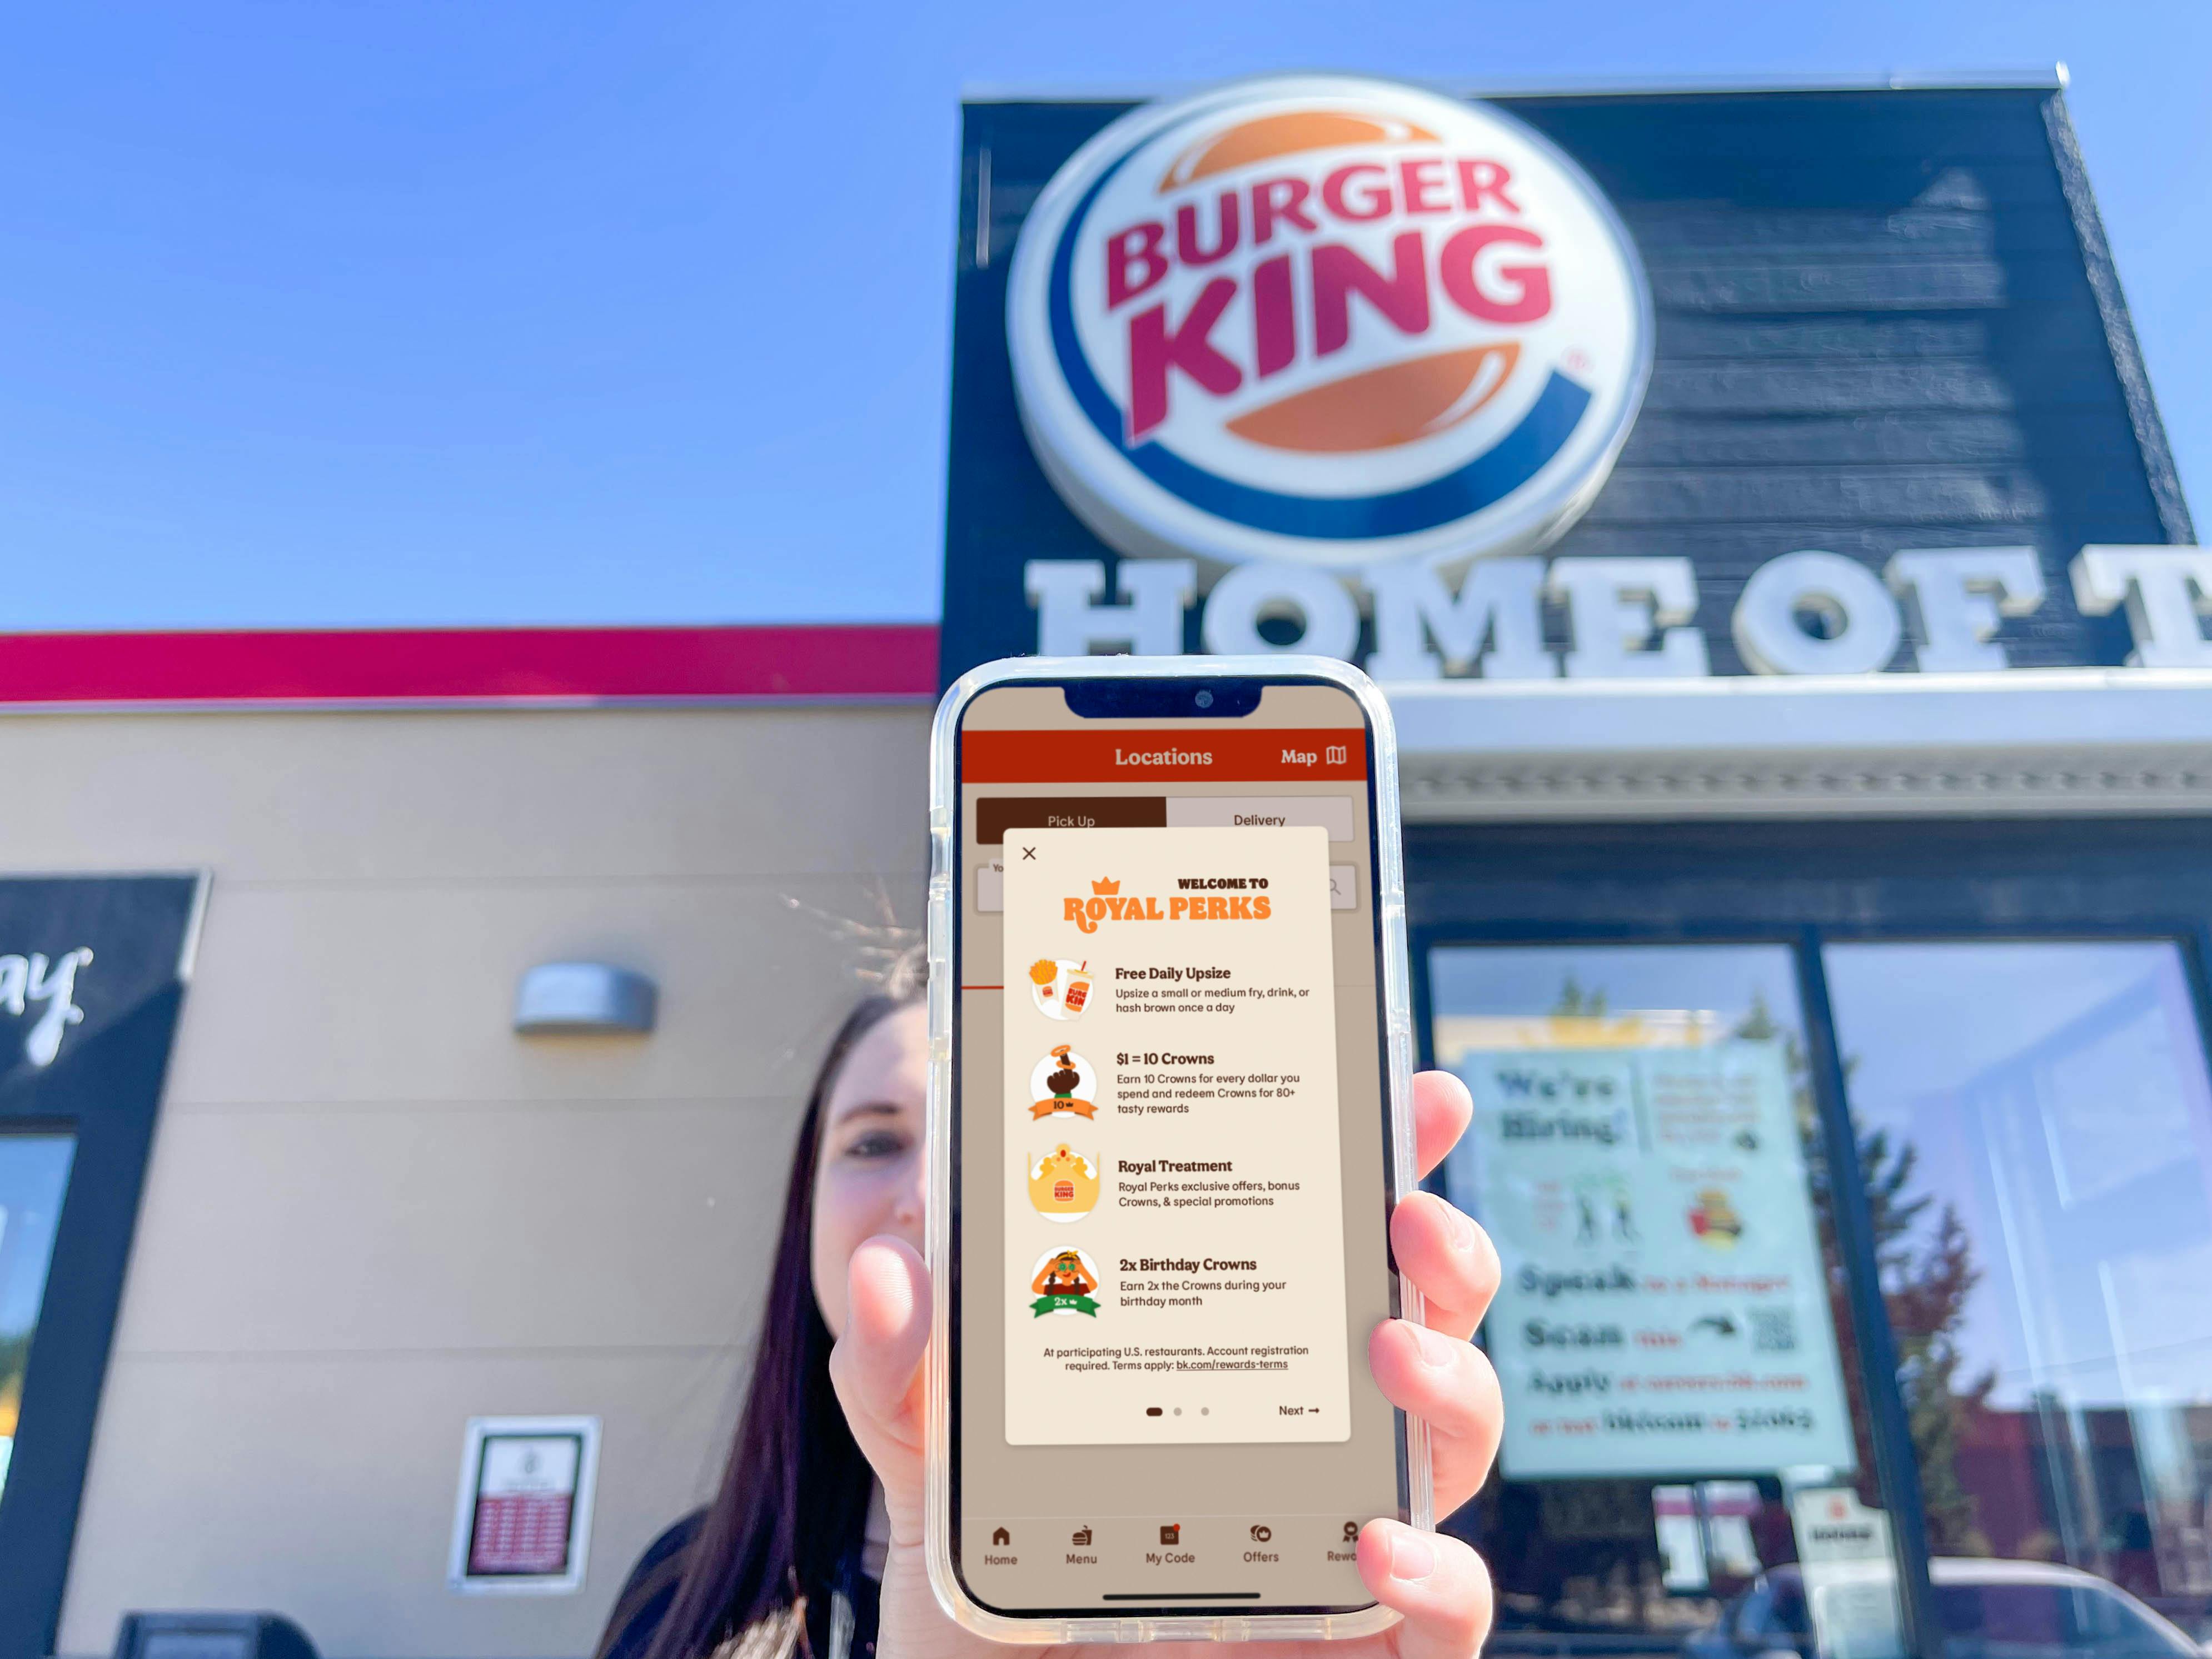 a woman holding a cellphone in front of face with burger king app on screen standing in front of burger king